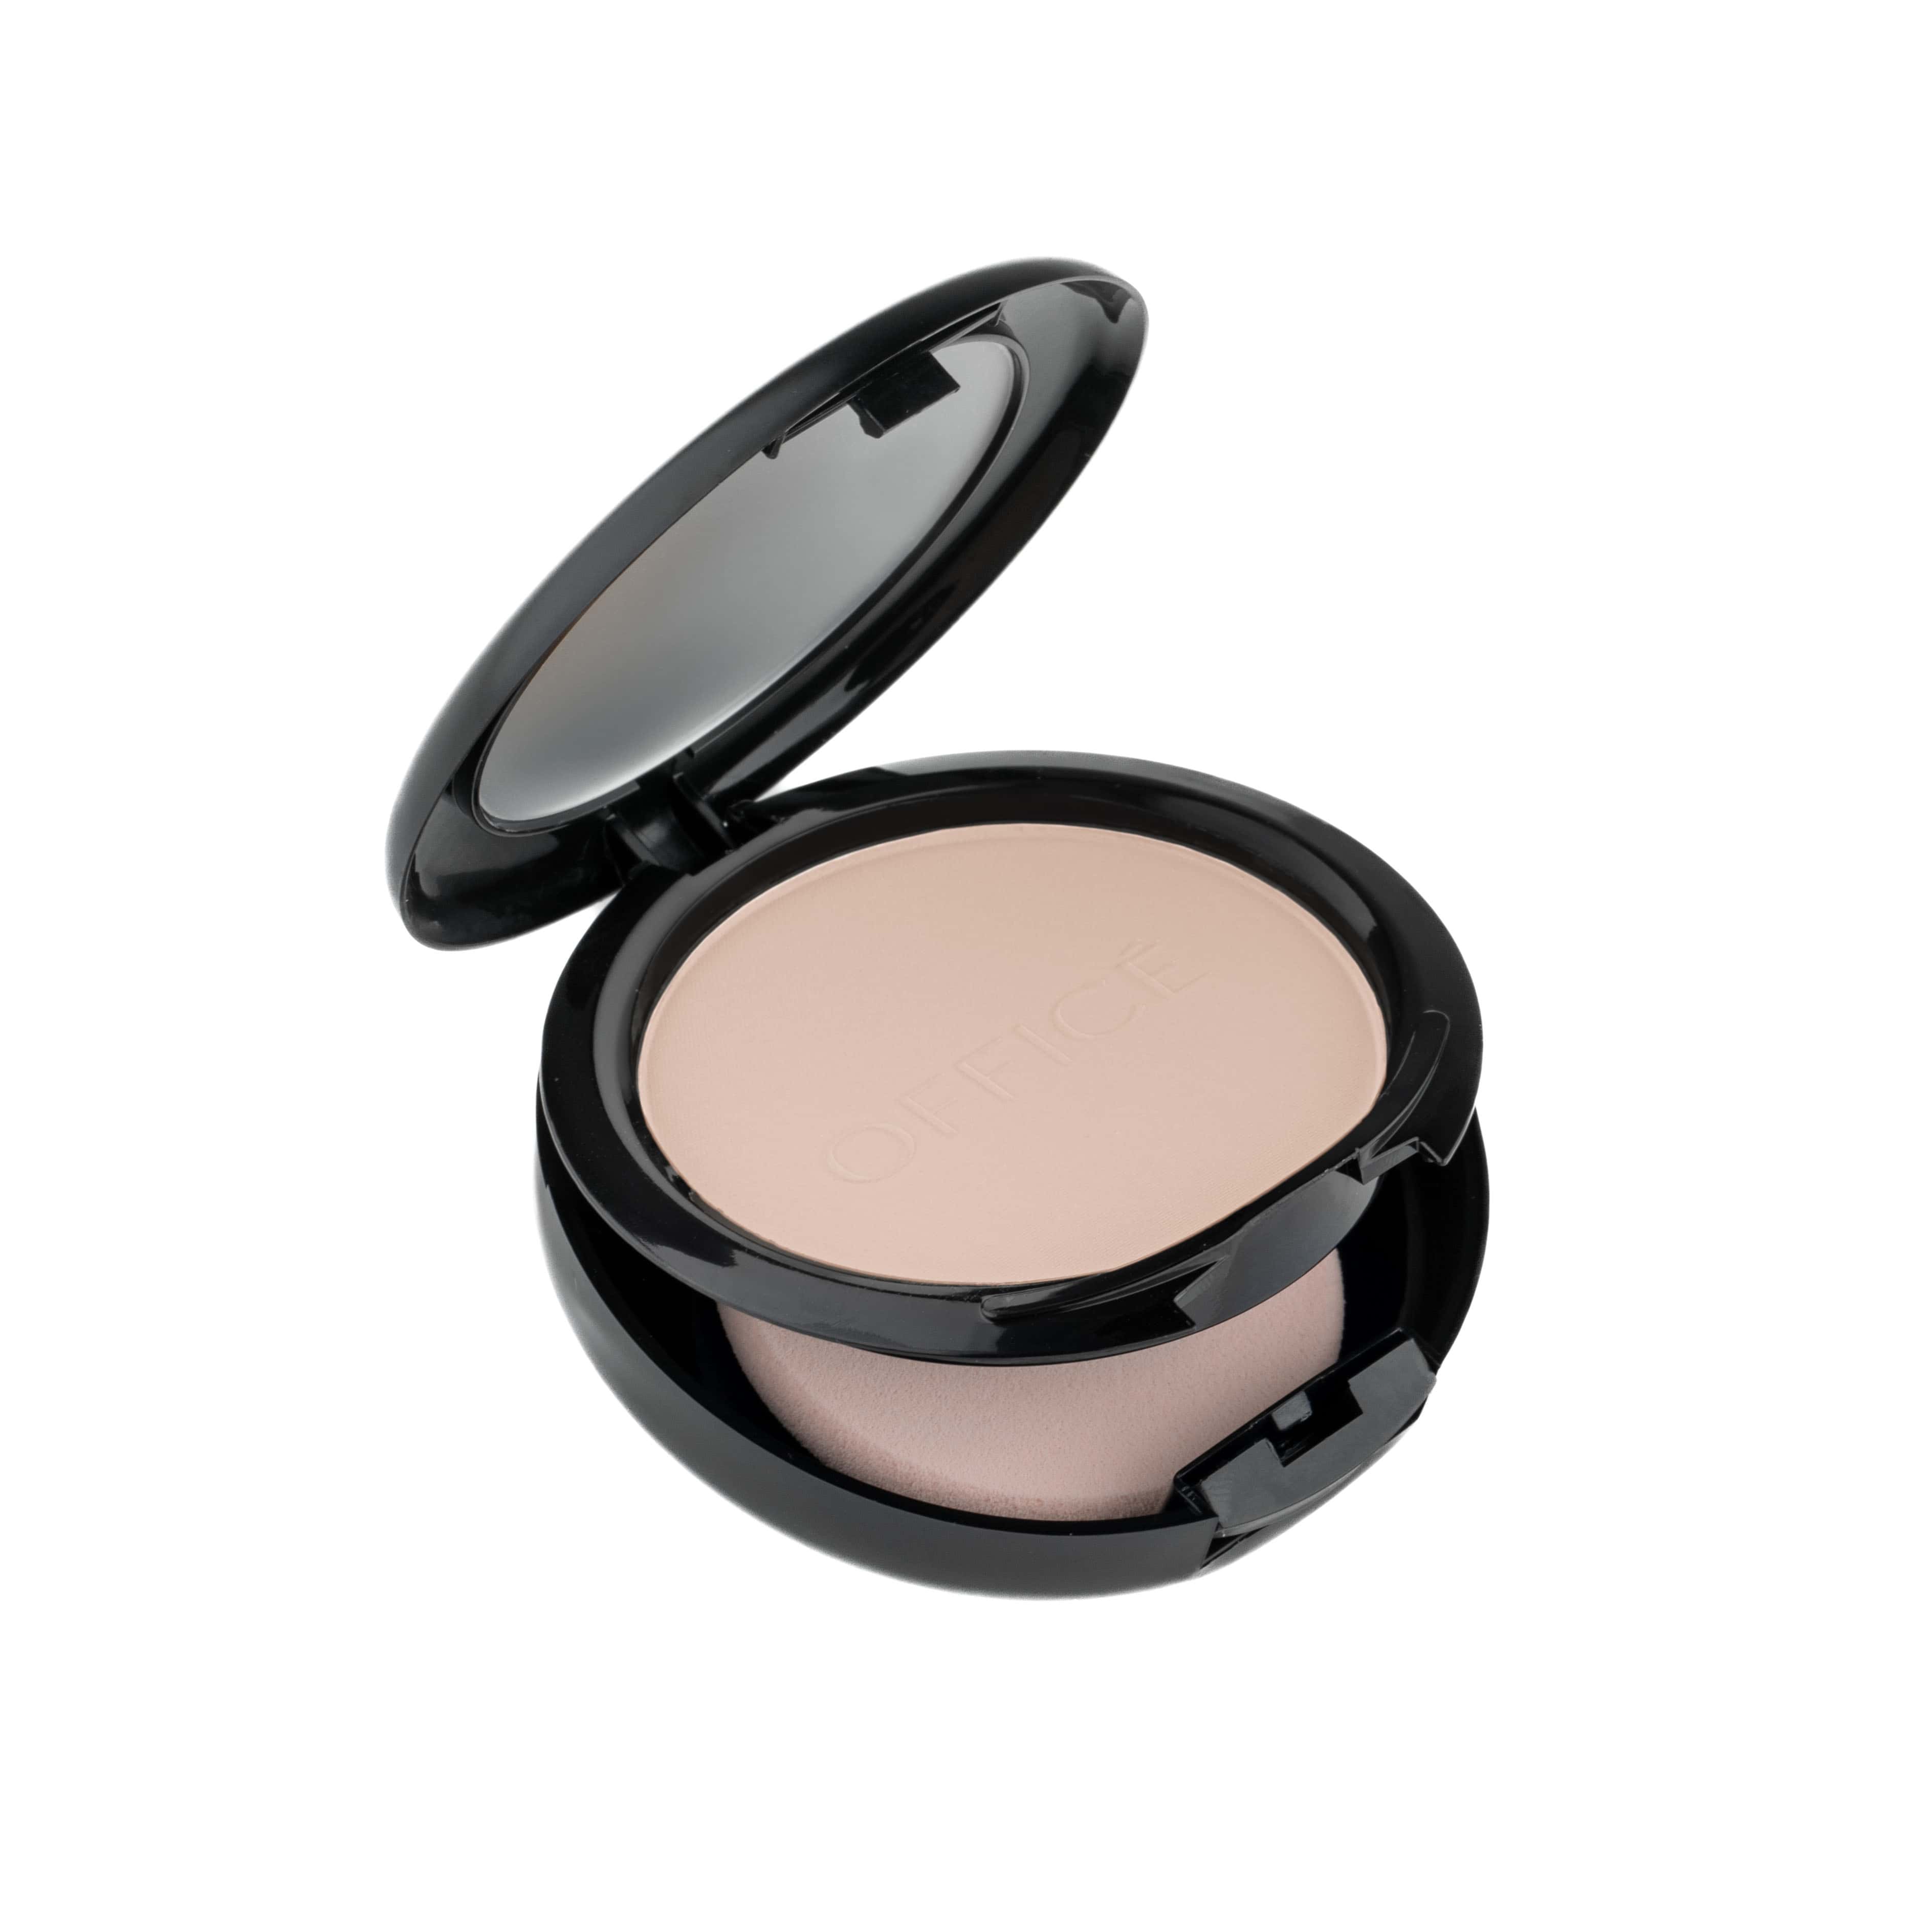 Long-wearing compact powder ,Water-resistant makeup, Dual usage powder cake, Full coverage powder, Matte finish powder, Natural look makeup, Buildable coverage, Skin-perfecting powder, Makeup for girls, Beauty essential compact, Everyday wear makeup, Teenage makeup product, Women's makeup item, Office makeup powder, Professional makeup compact